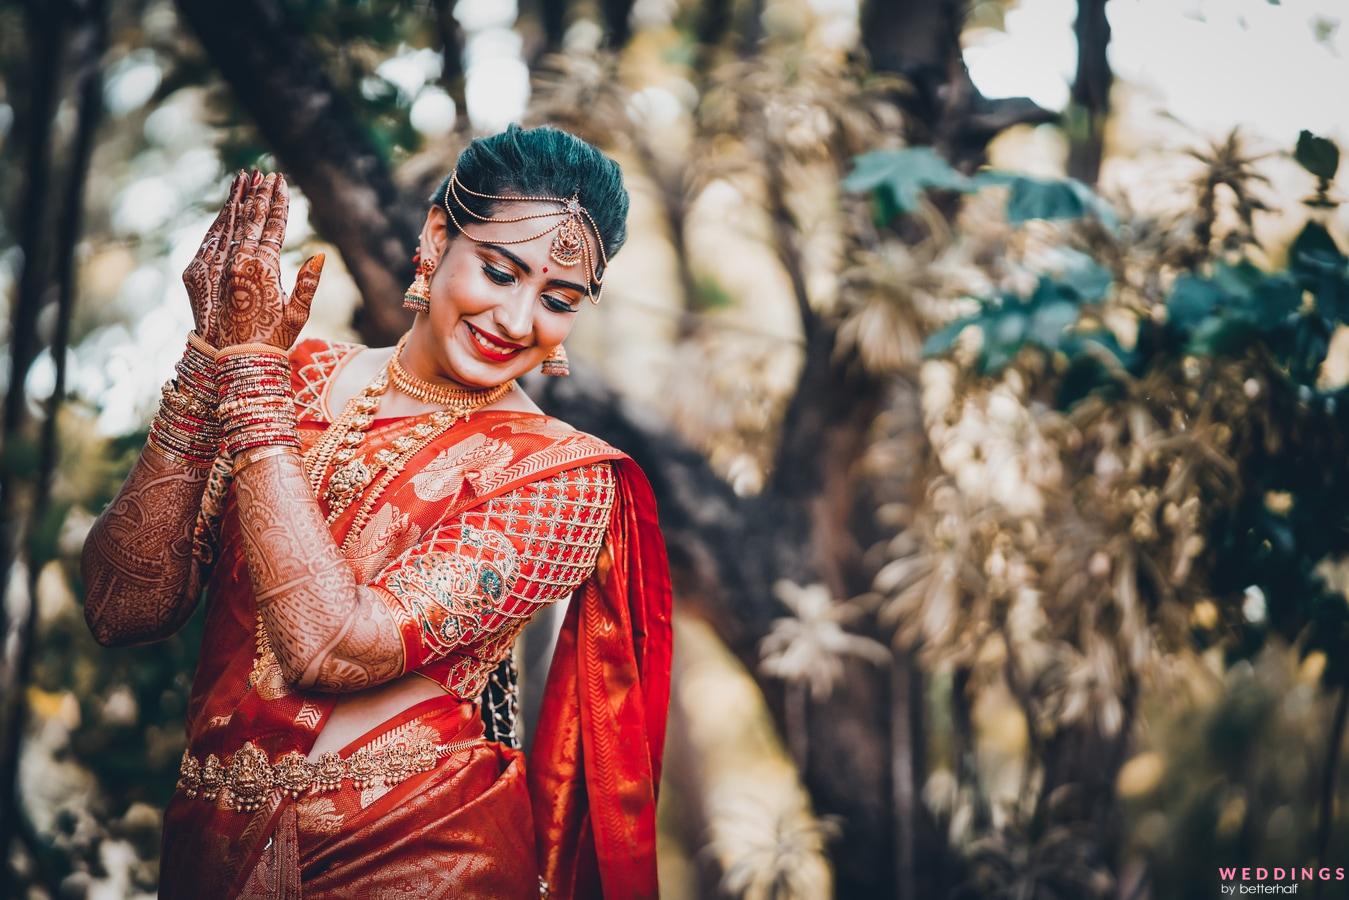 Close-up of Indian Bride and Groom during a Traditional Wedding Ceremony ·  Free Stock Photo